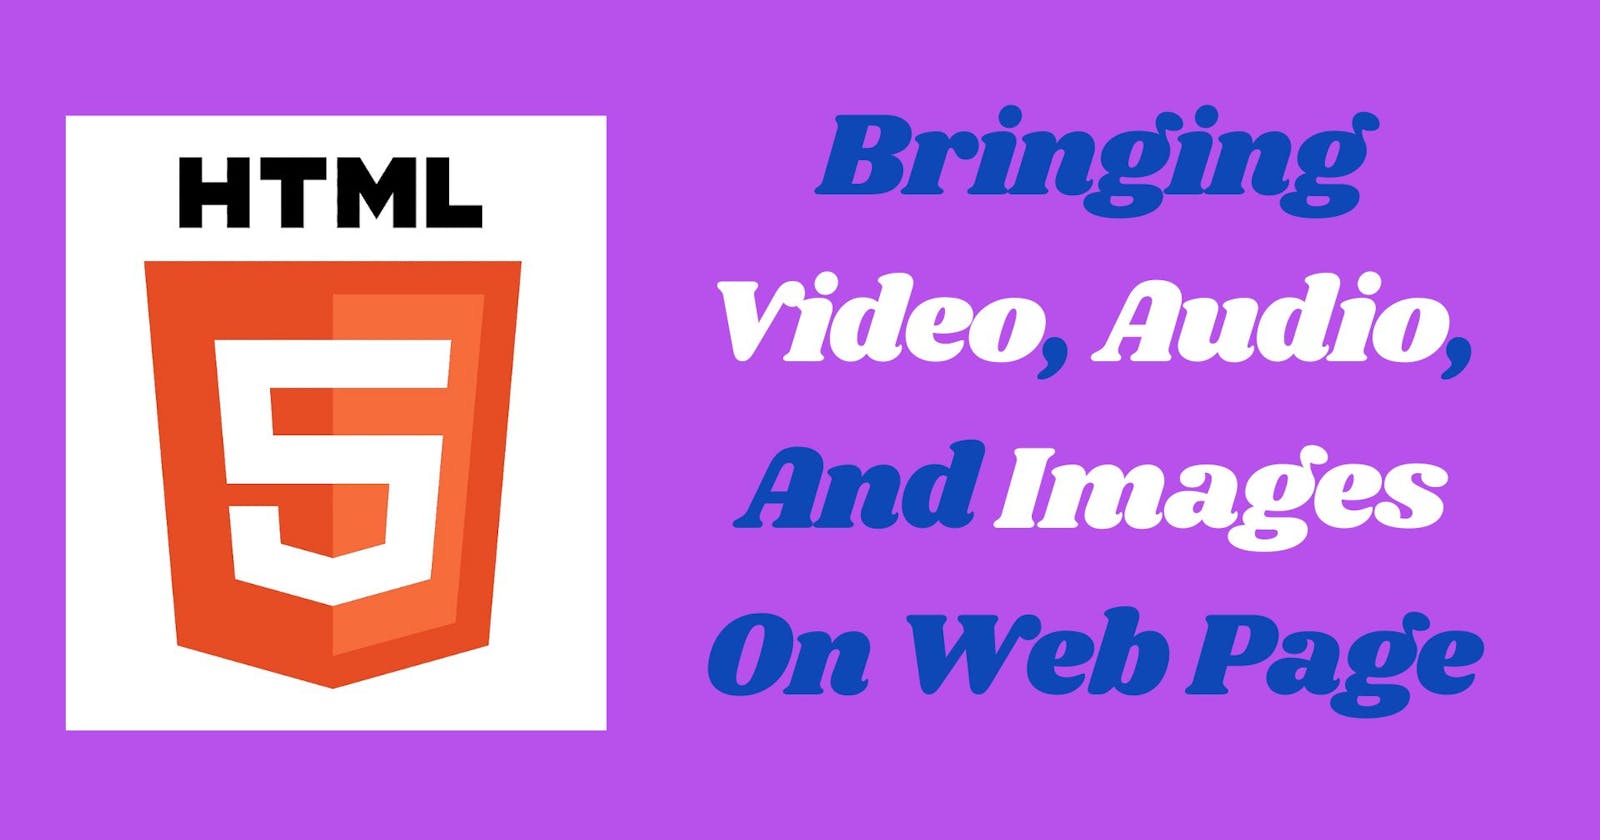 Bringing Video, Audio, And Images On Web Page